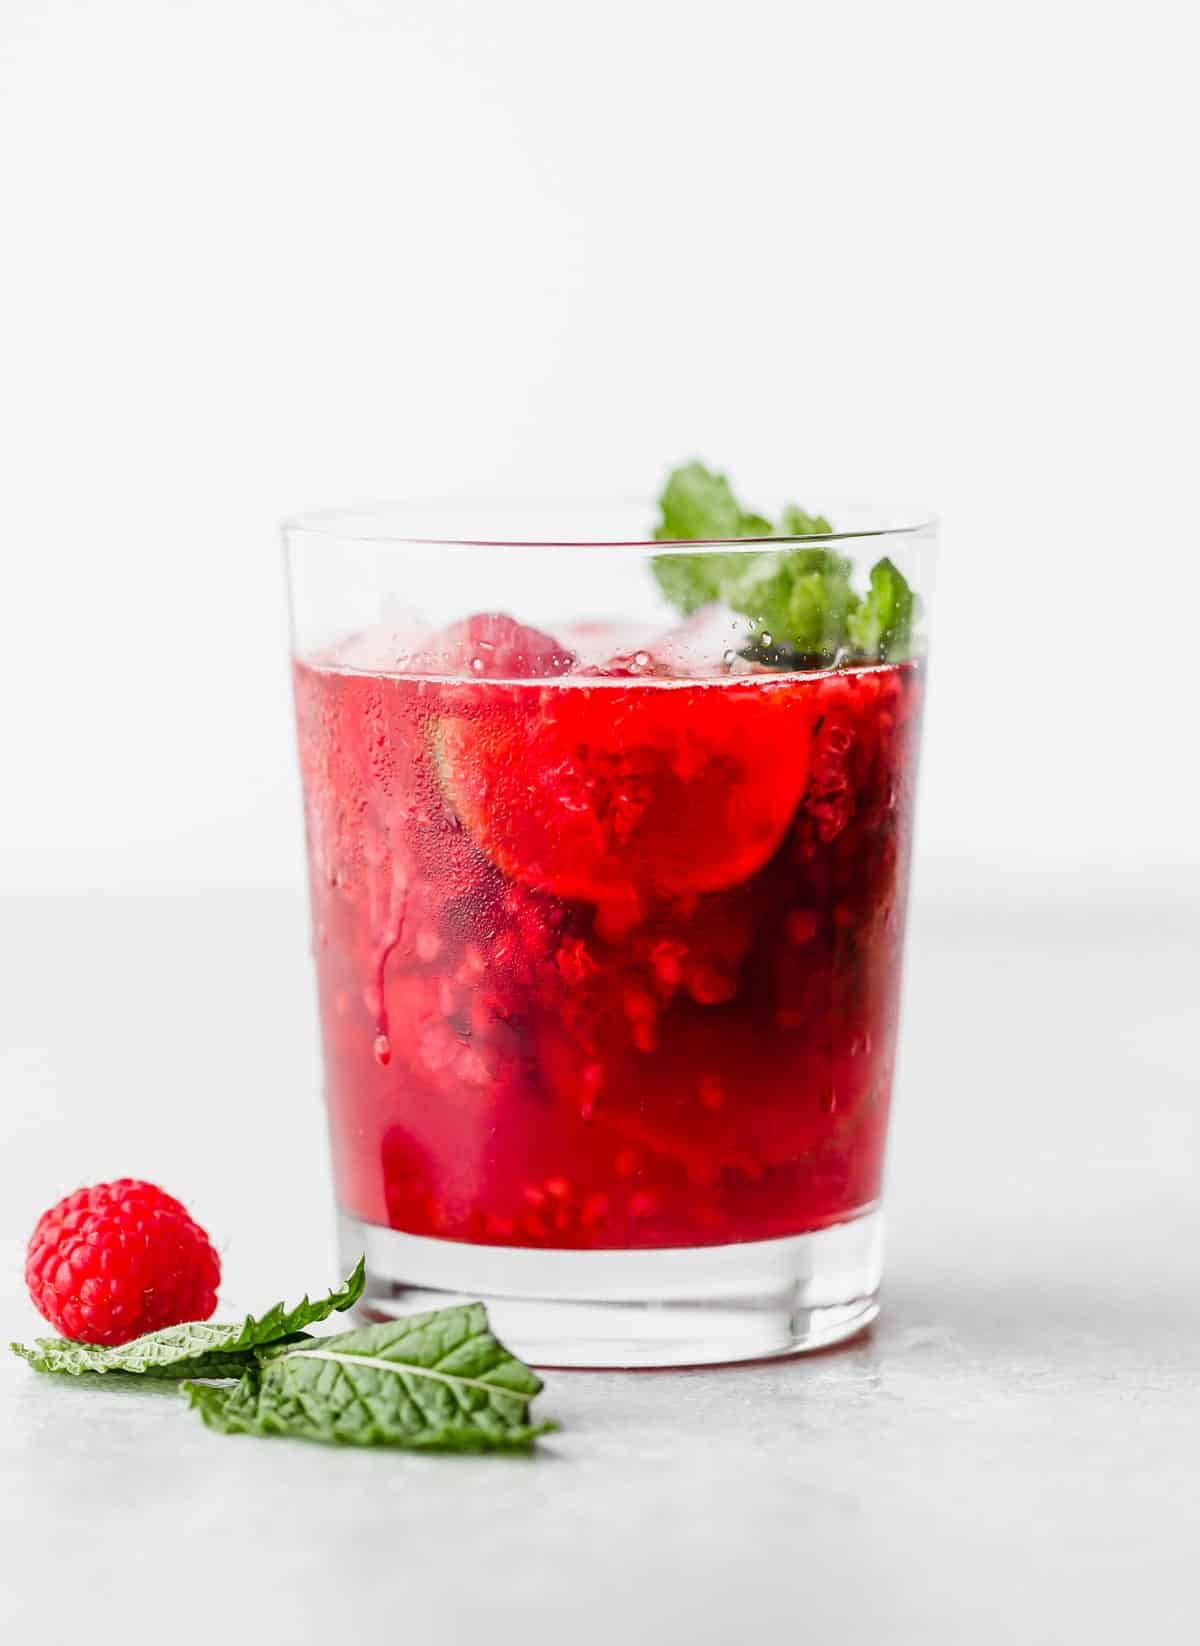 A glass of raspberry mocktail against a white background.